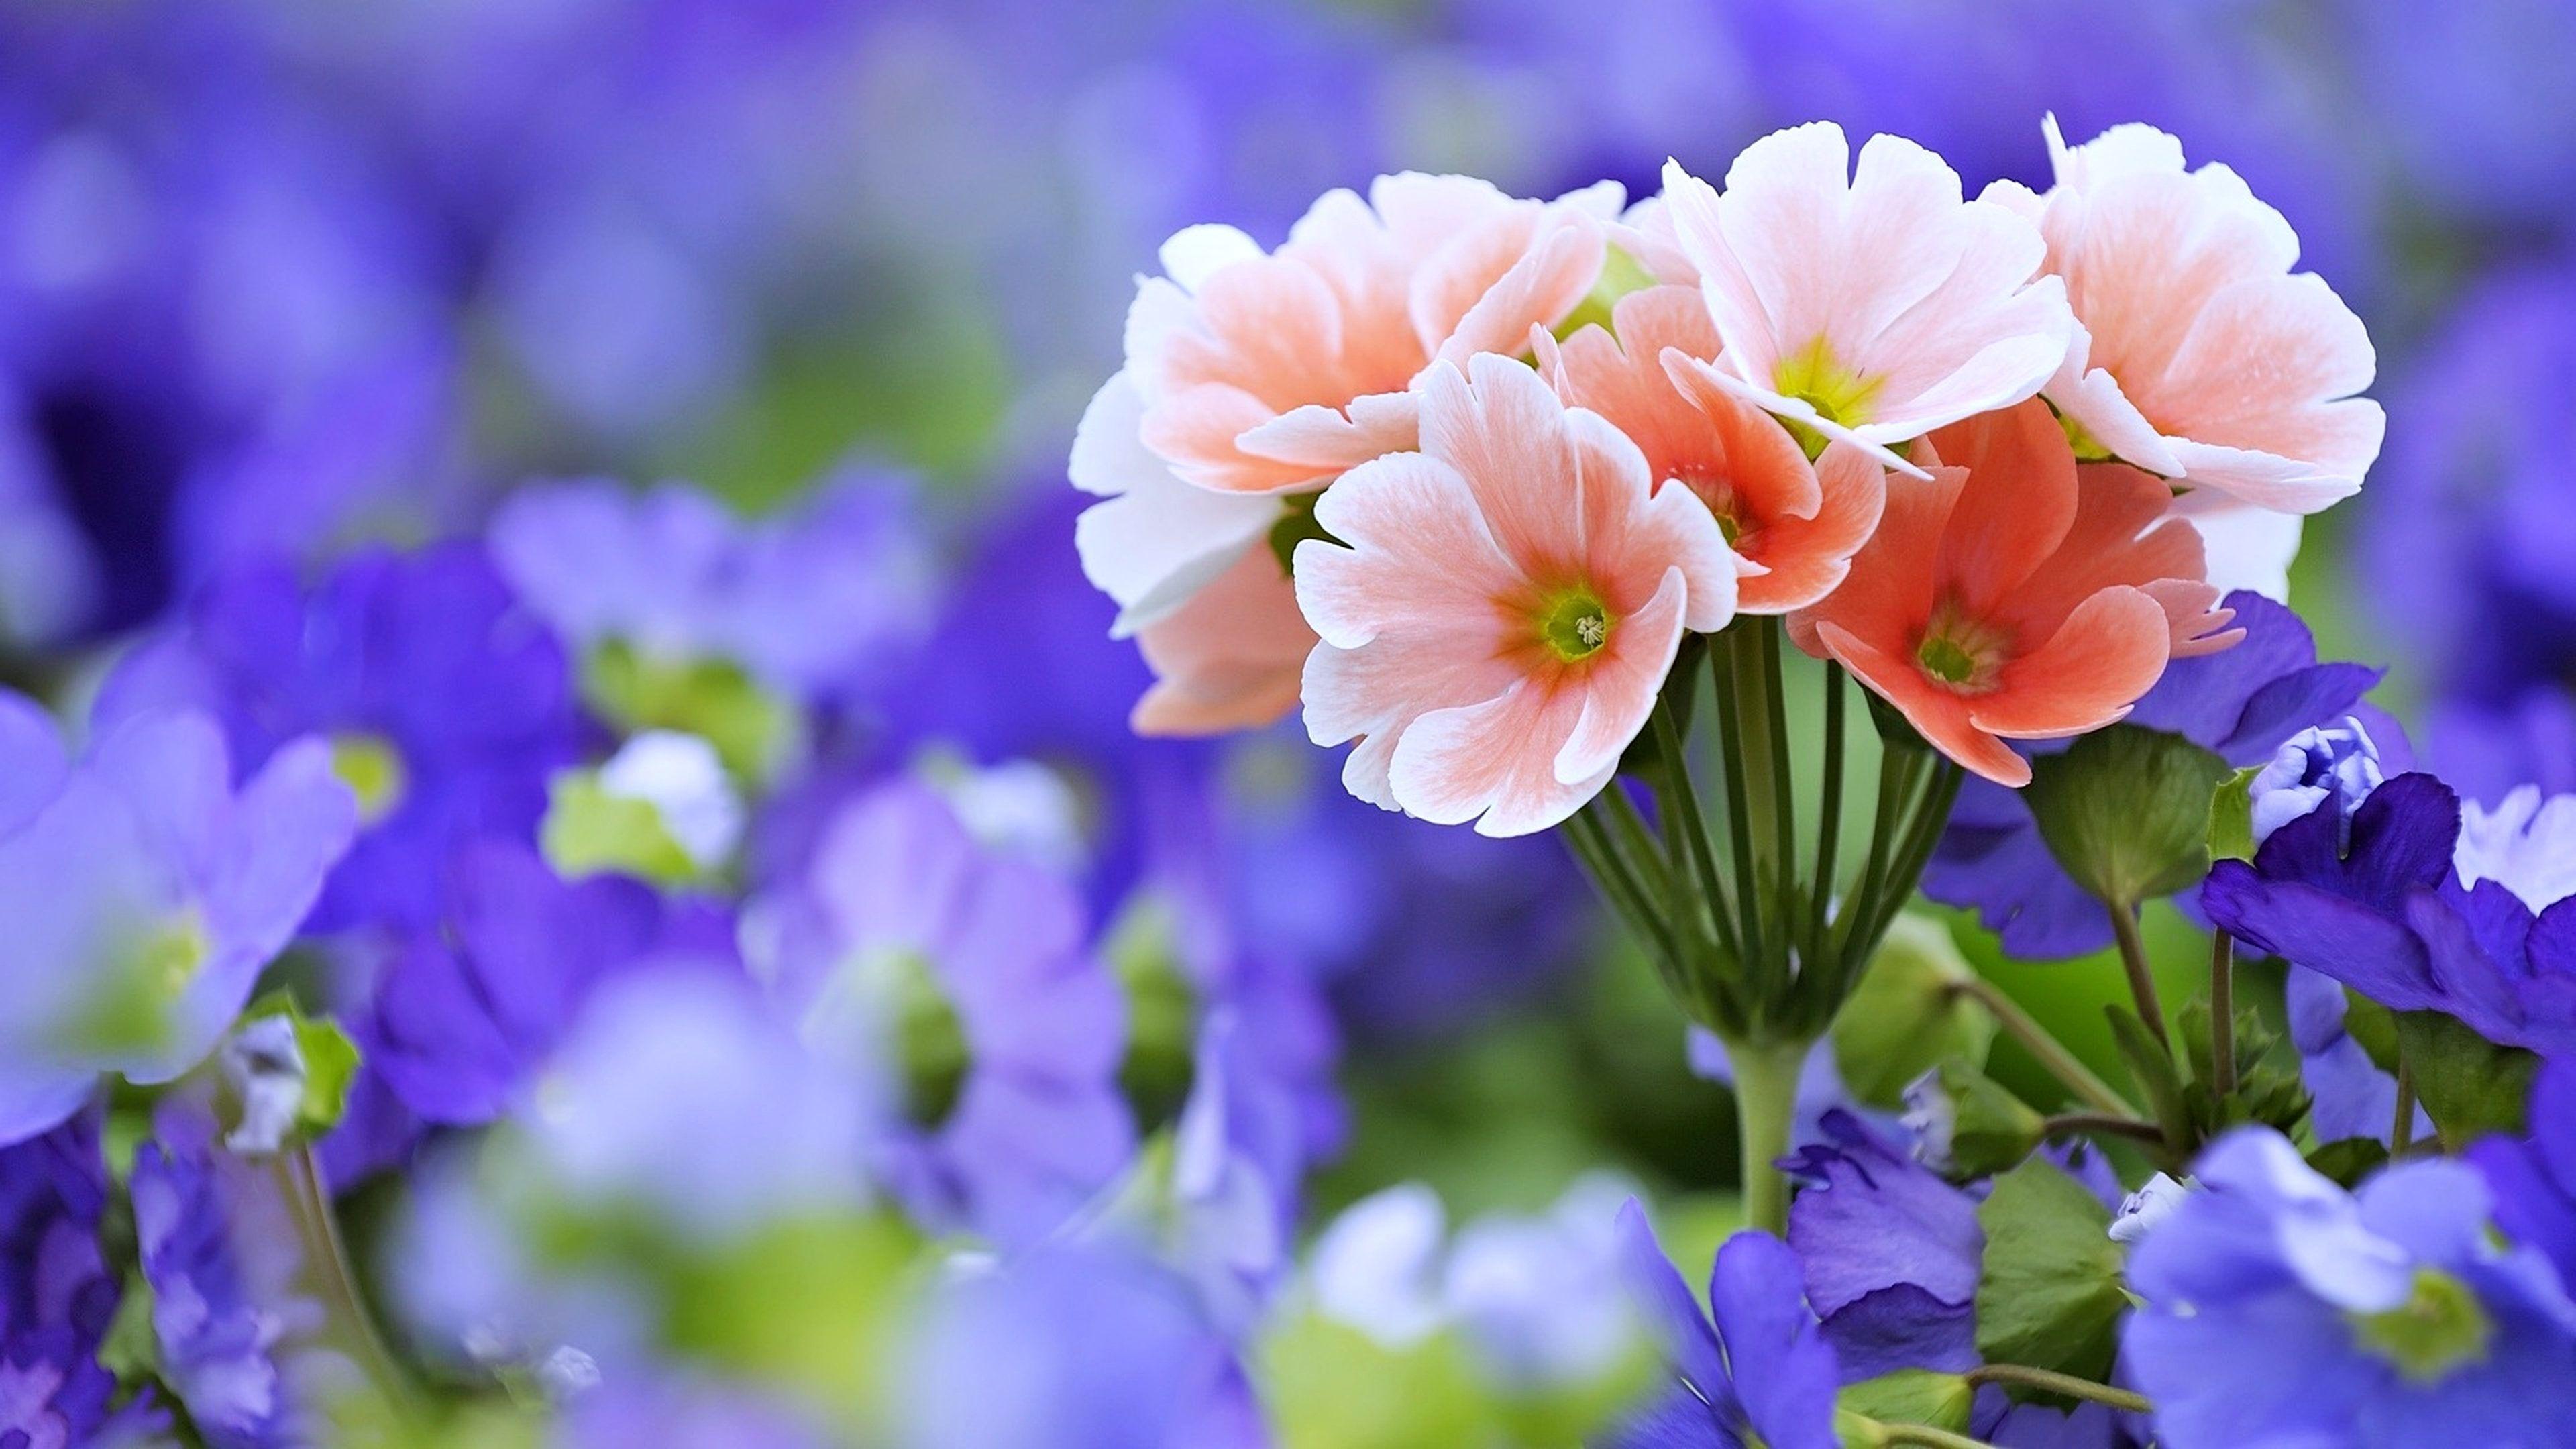 3840 X 2160 Flowers Wallpapers Top Free 3840 X 2160 Flowers